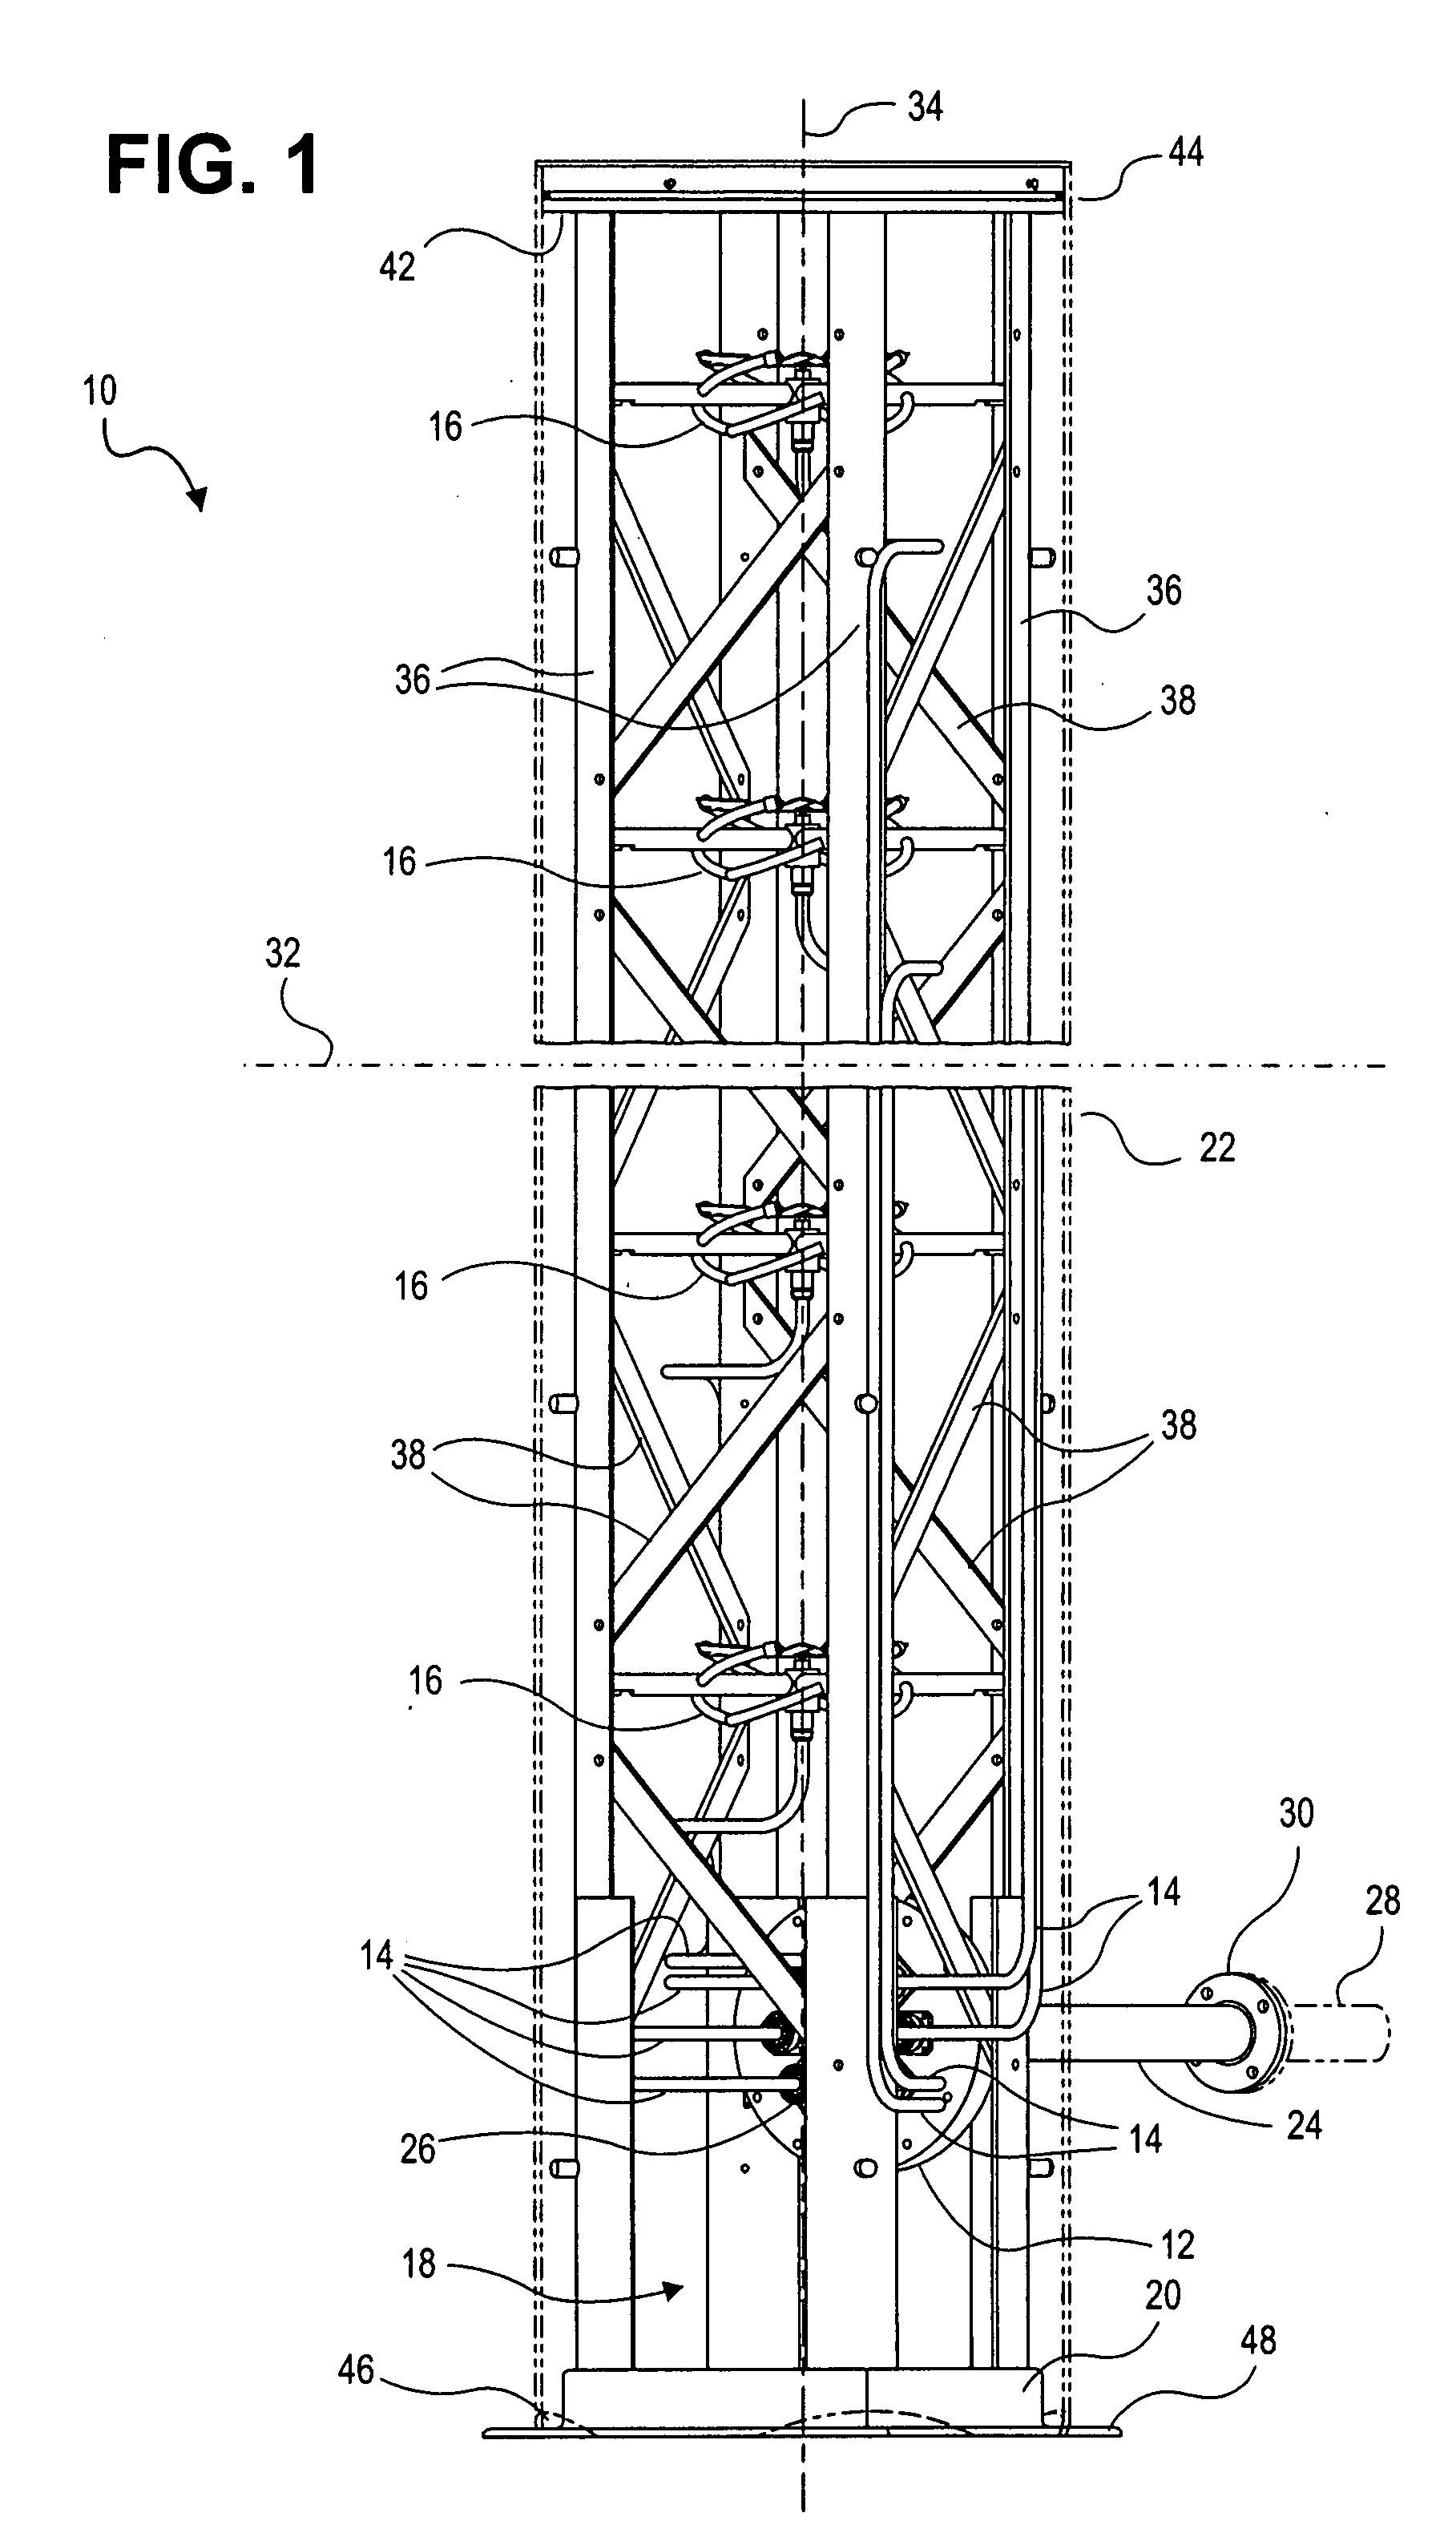 Circularly polarized low wind load omnidirectional antenna apparatus and method